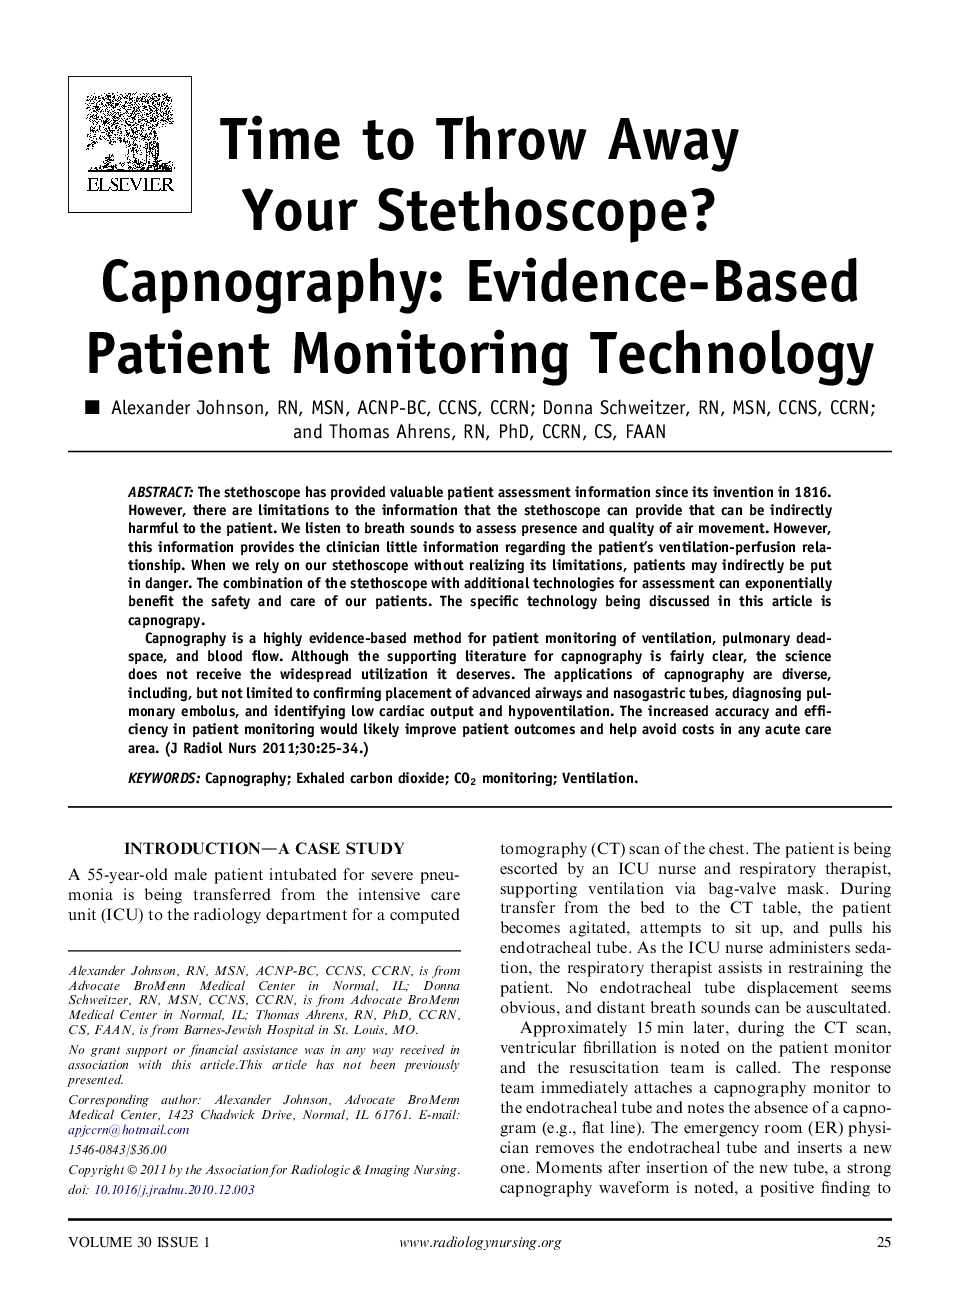 Time to Throw Away Your Stethoscope? : Capnography: Evidence-Based Patient Monitoring Technology